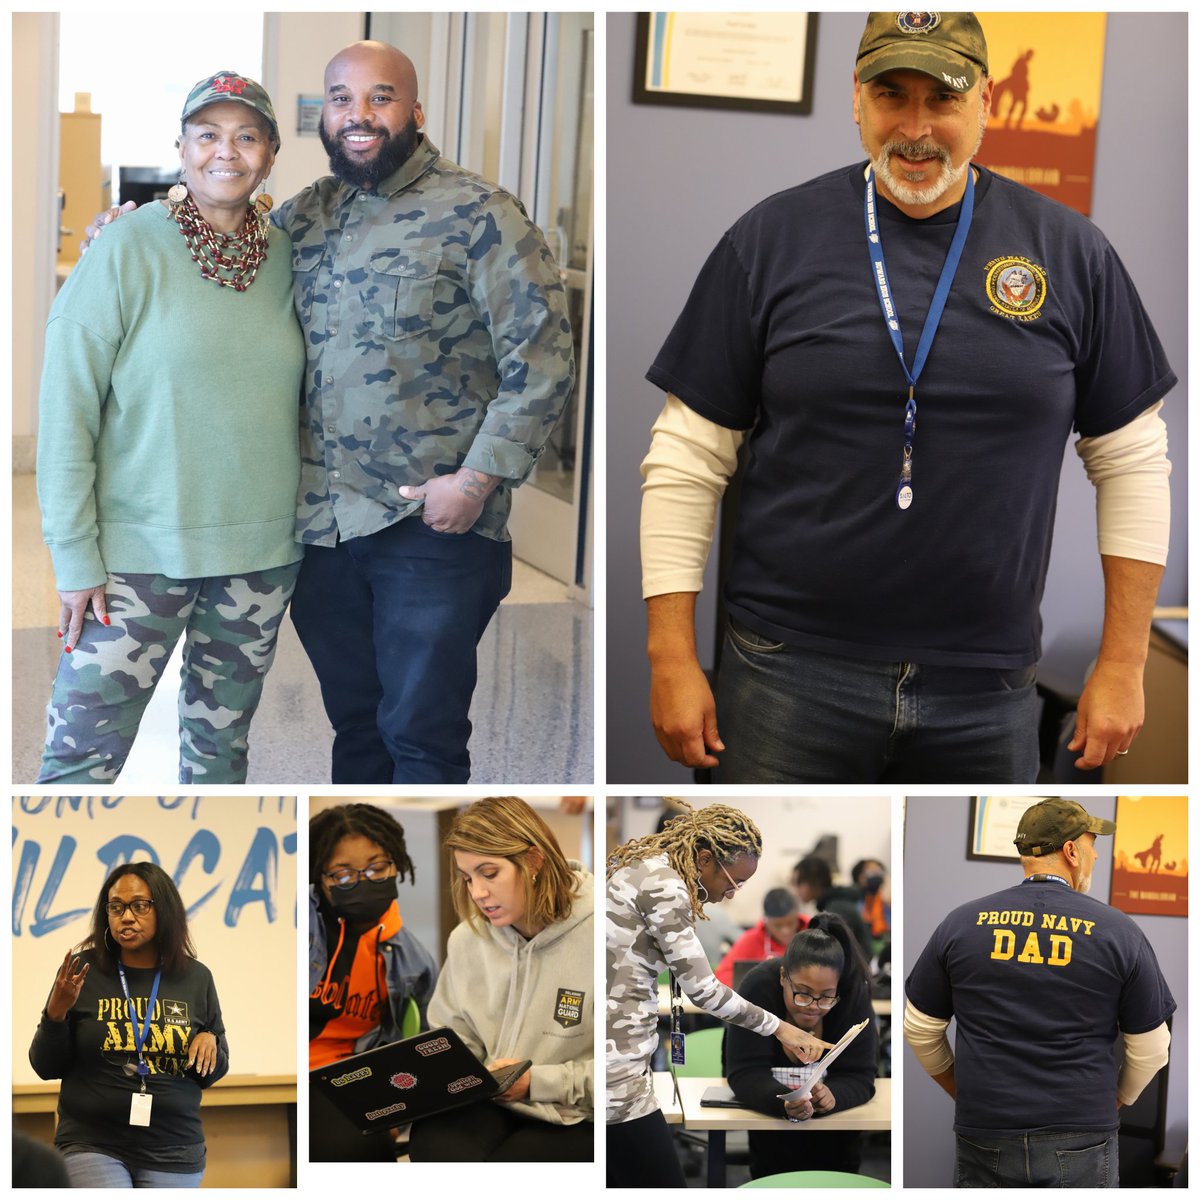 Staff wore their Army fatigues or Military Merch today in support of our Armed Forces. #collegeapplicationweek